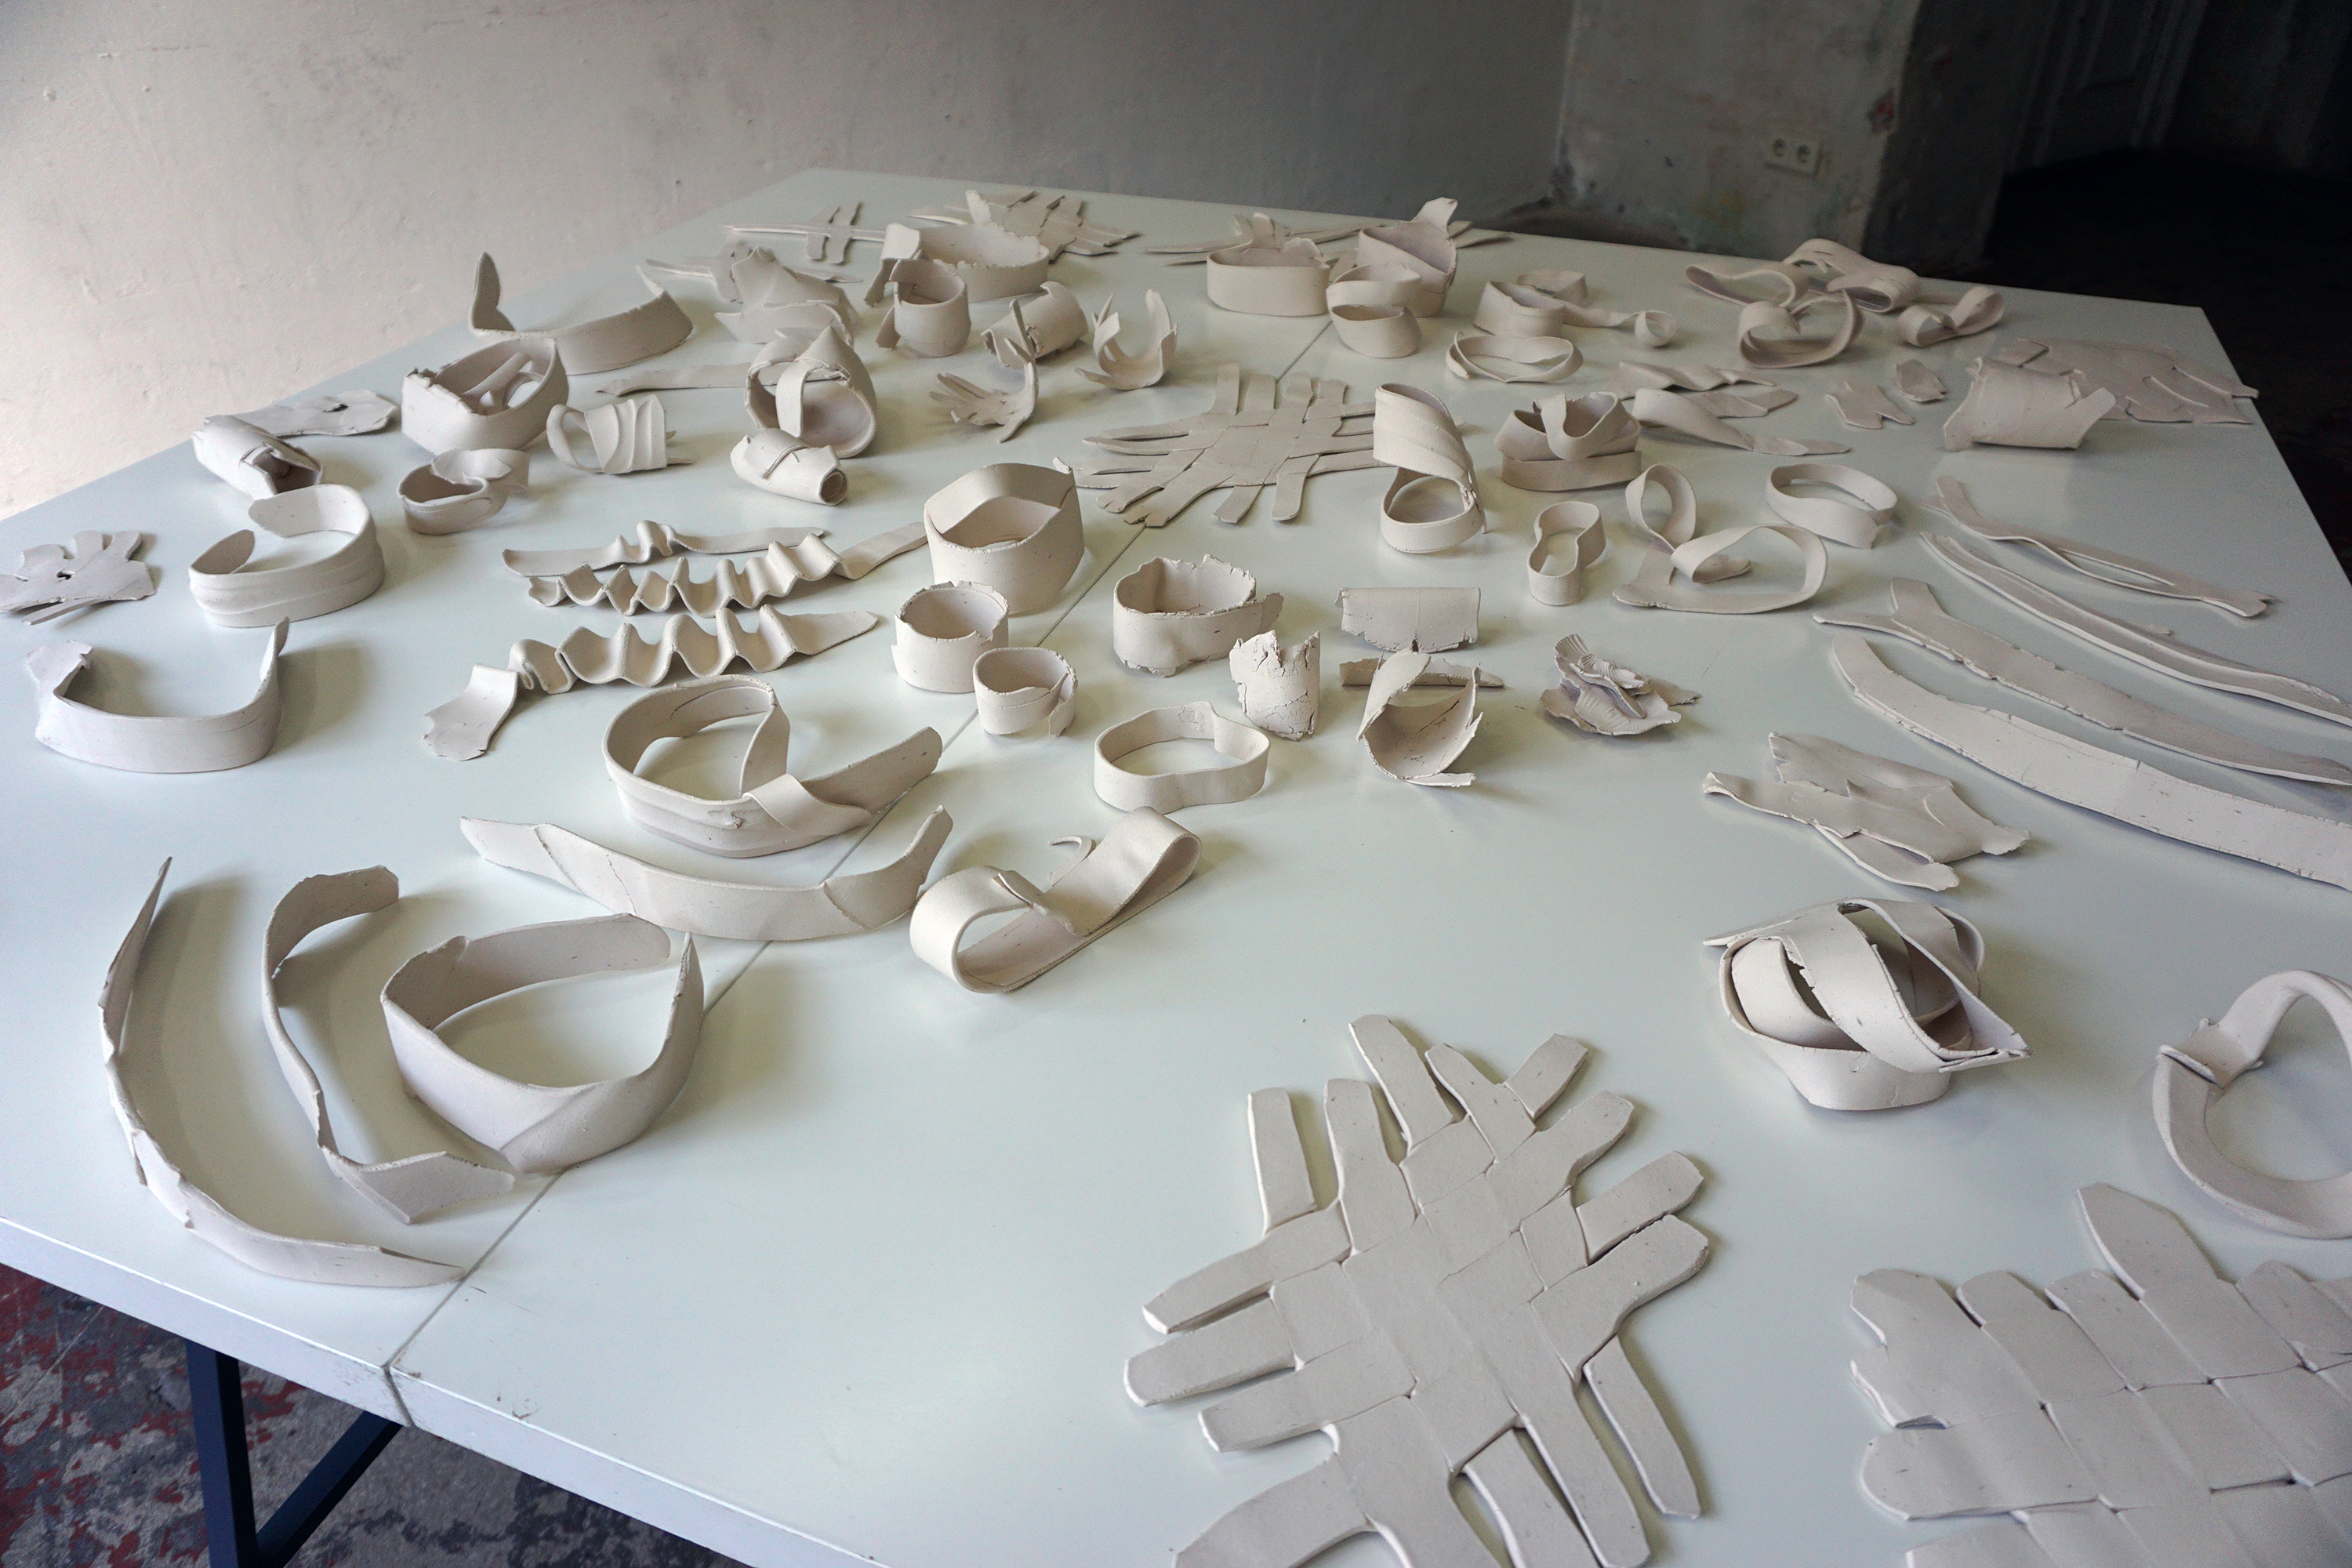 Jennifer Danos, On the Ideology of Fieldwork, 2016, Installation and detail views, Fired, unglazed white clay on tables, Dimensions variable, from Fieldwork: Berlin Summer Salon